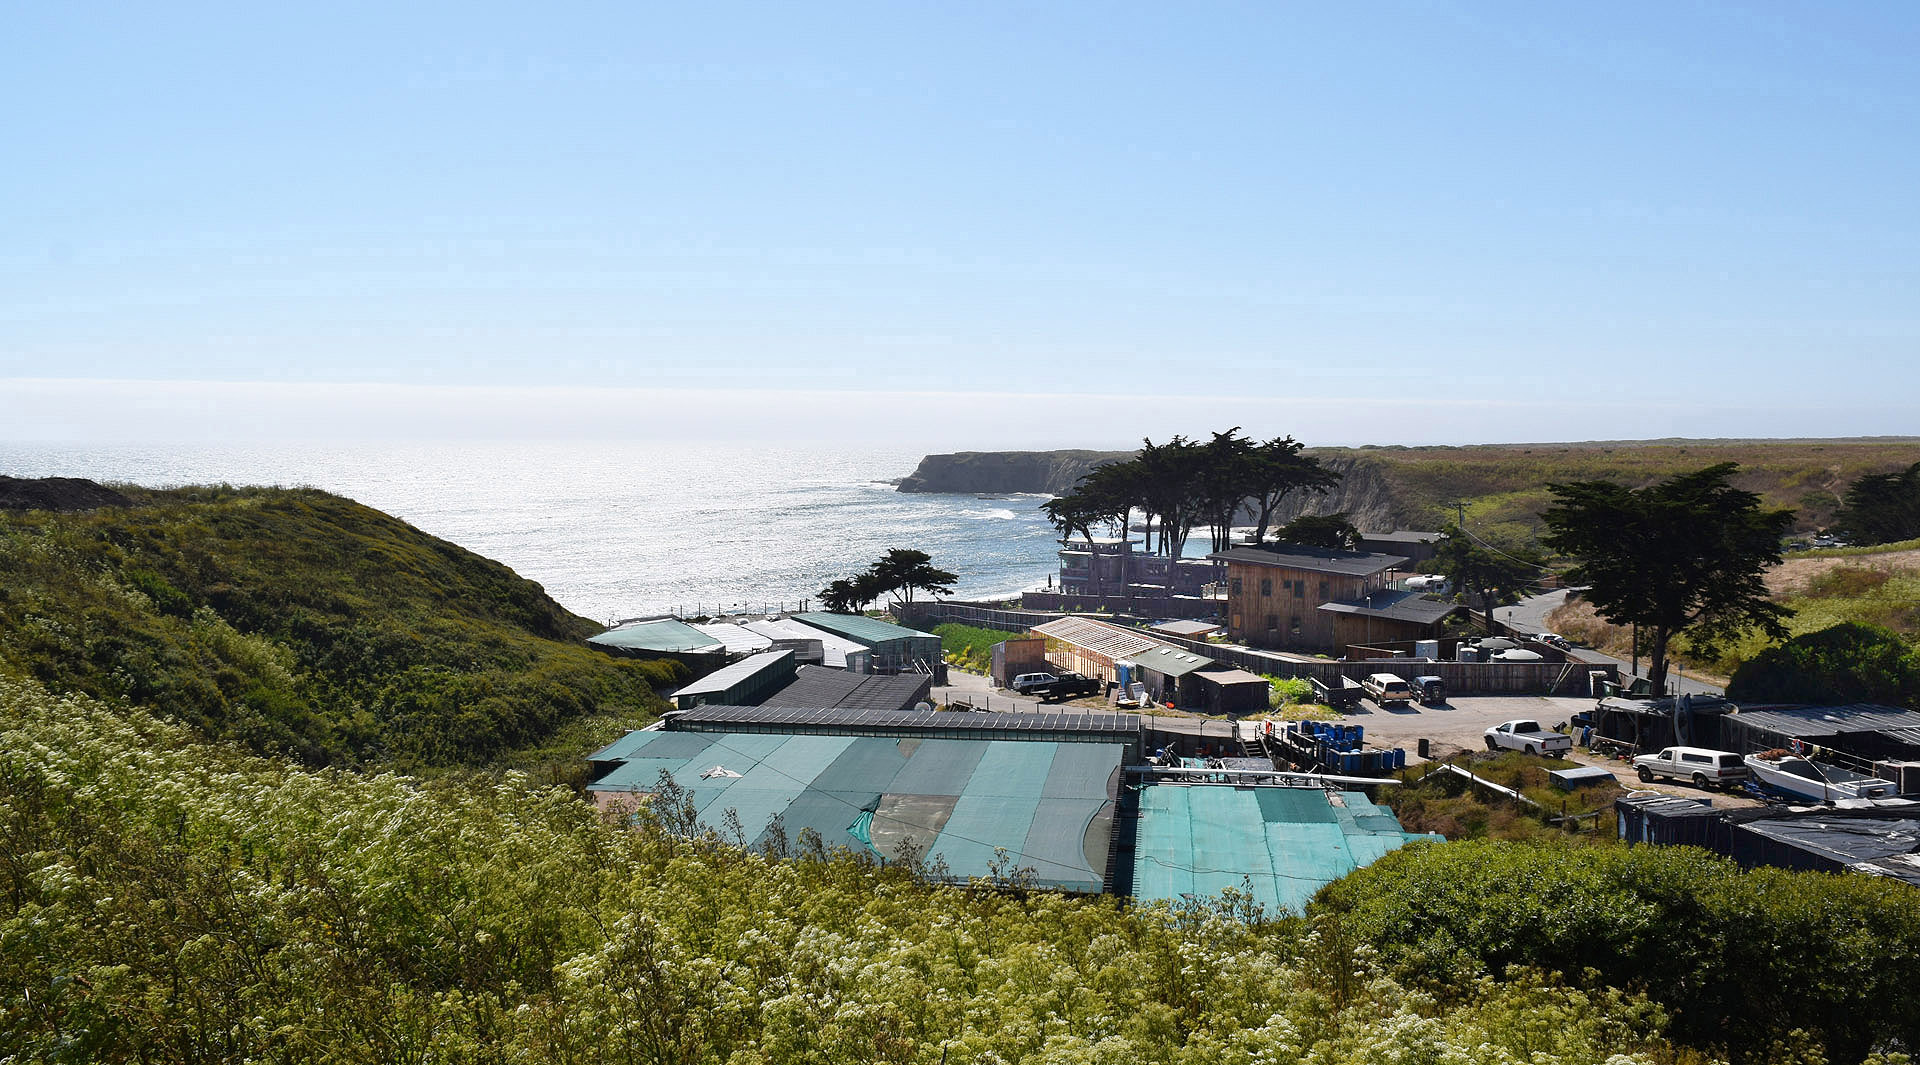 American Abalone Farms is located on a picturesque cove near Santa Cruz, where visitors can buy and consume abalone and other local seafood on Saturdays.